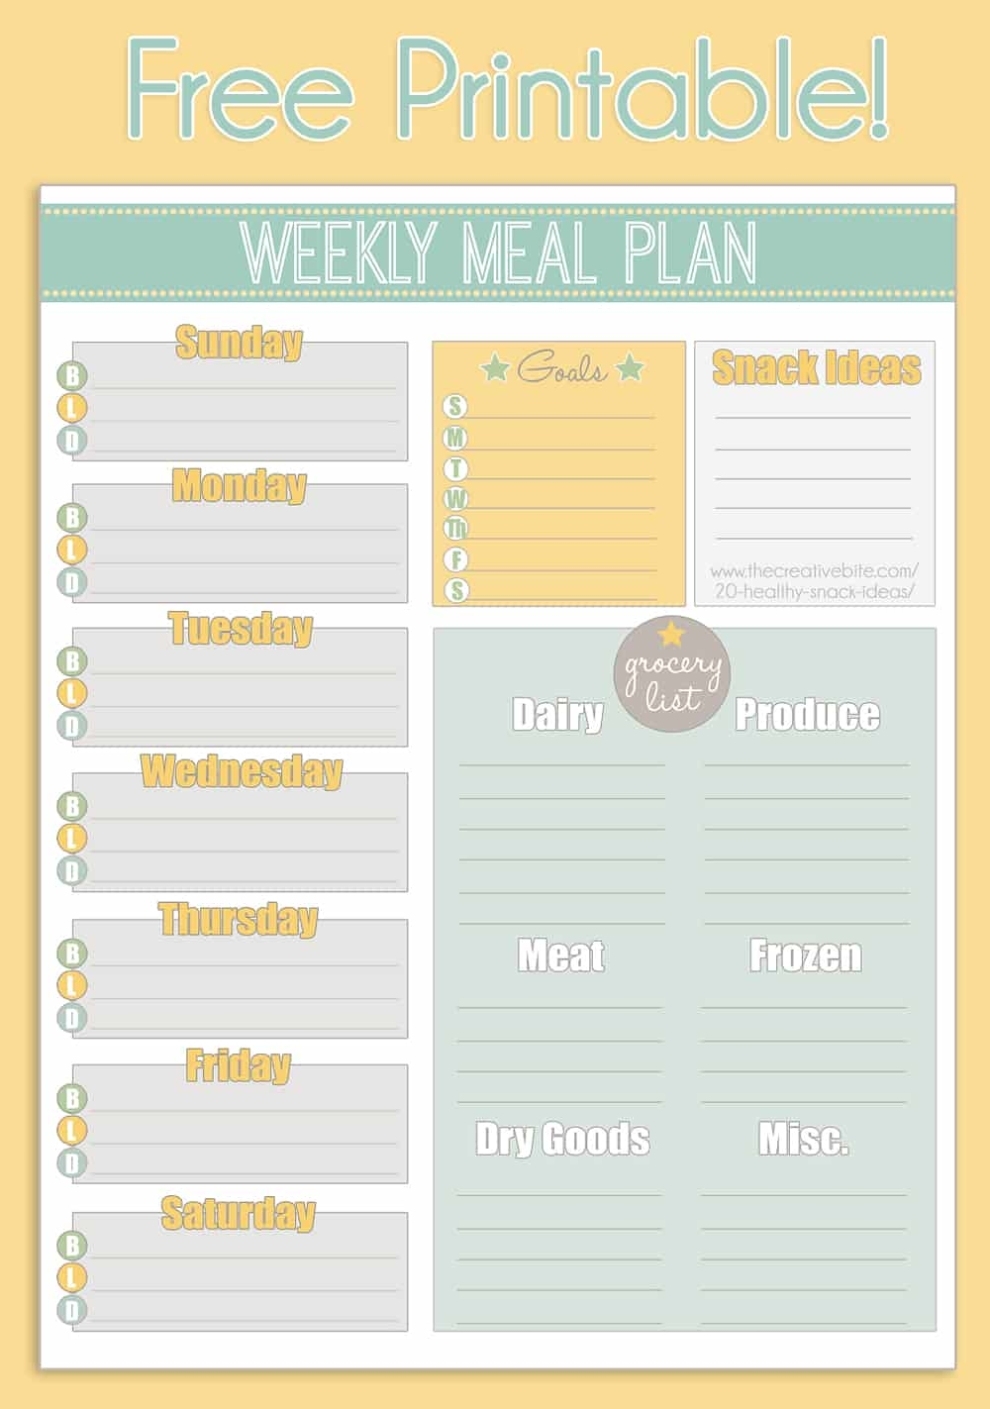 Free Printable Weekly Meal Planner + Calendar For Menu Planner With Grocery List Template